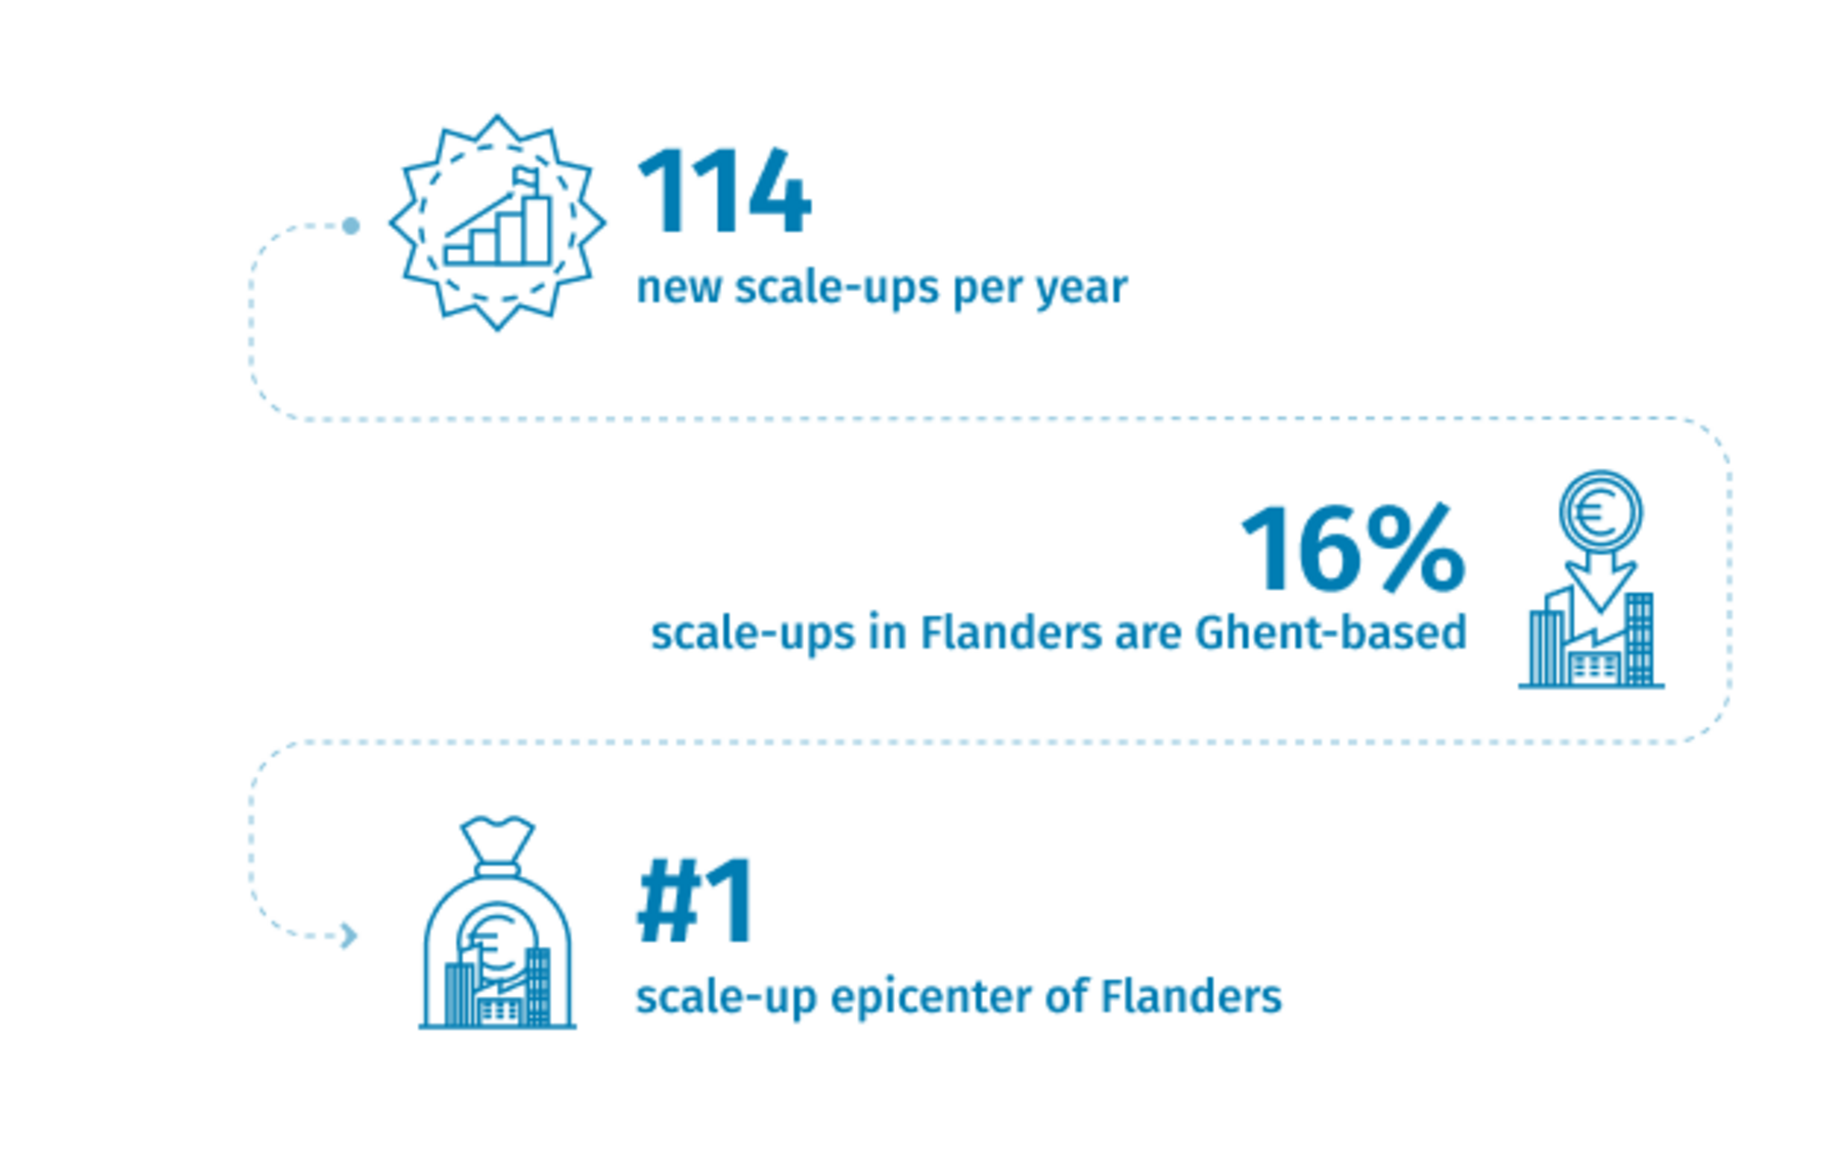 Scale-up Business: 114 new scale-ups per year, 16% scale-ups in Flanders are Ghent-based, number 1 scale-up epicenter of Flanders